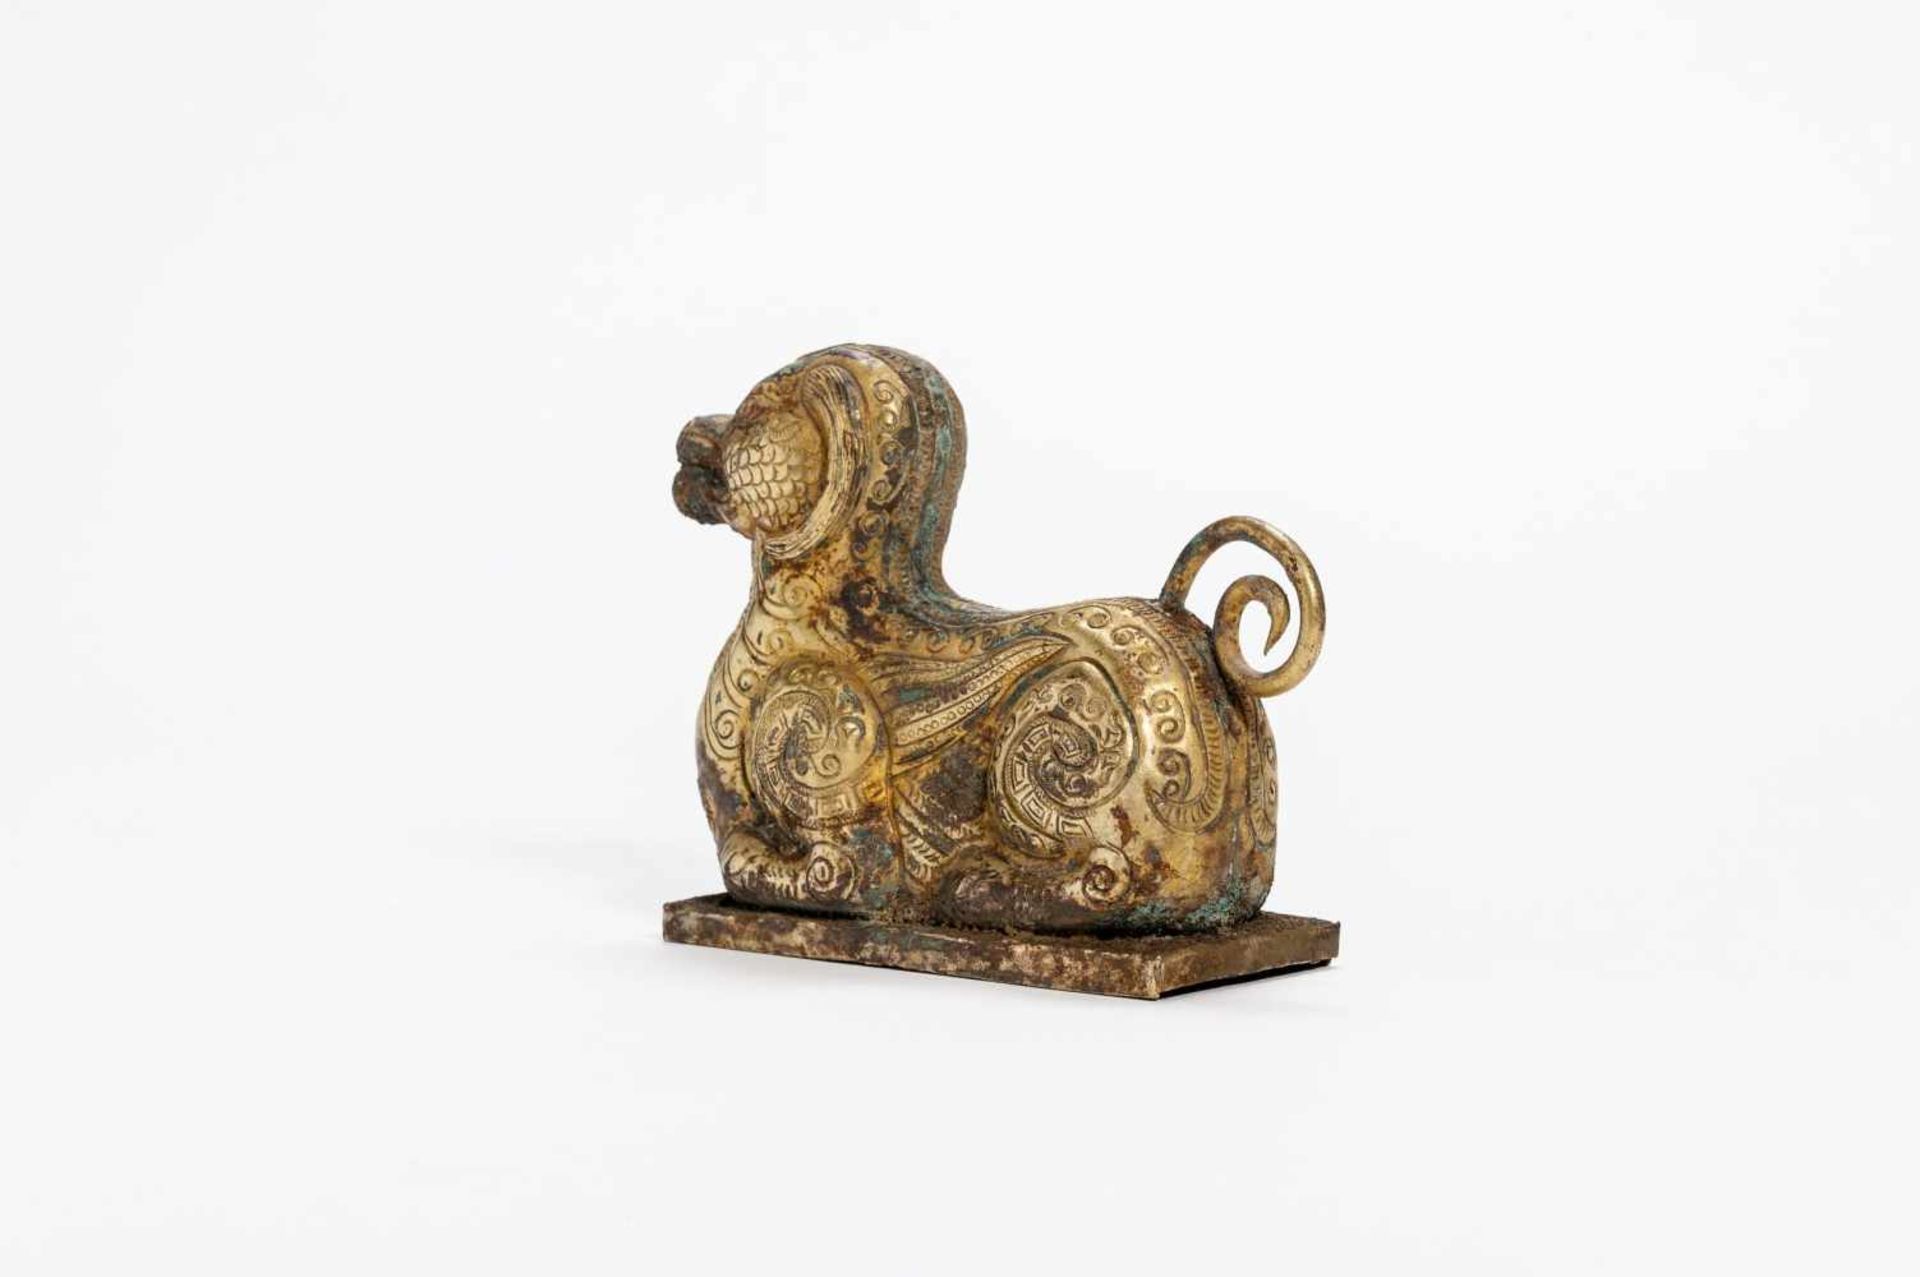 MYTHICAL ANIMAL Copper repoussé with fire gilding. China, presumably Qing-dynasty In archaic - Image 5 of 6